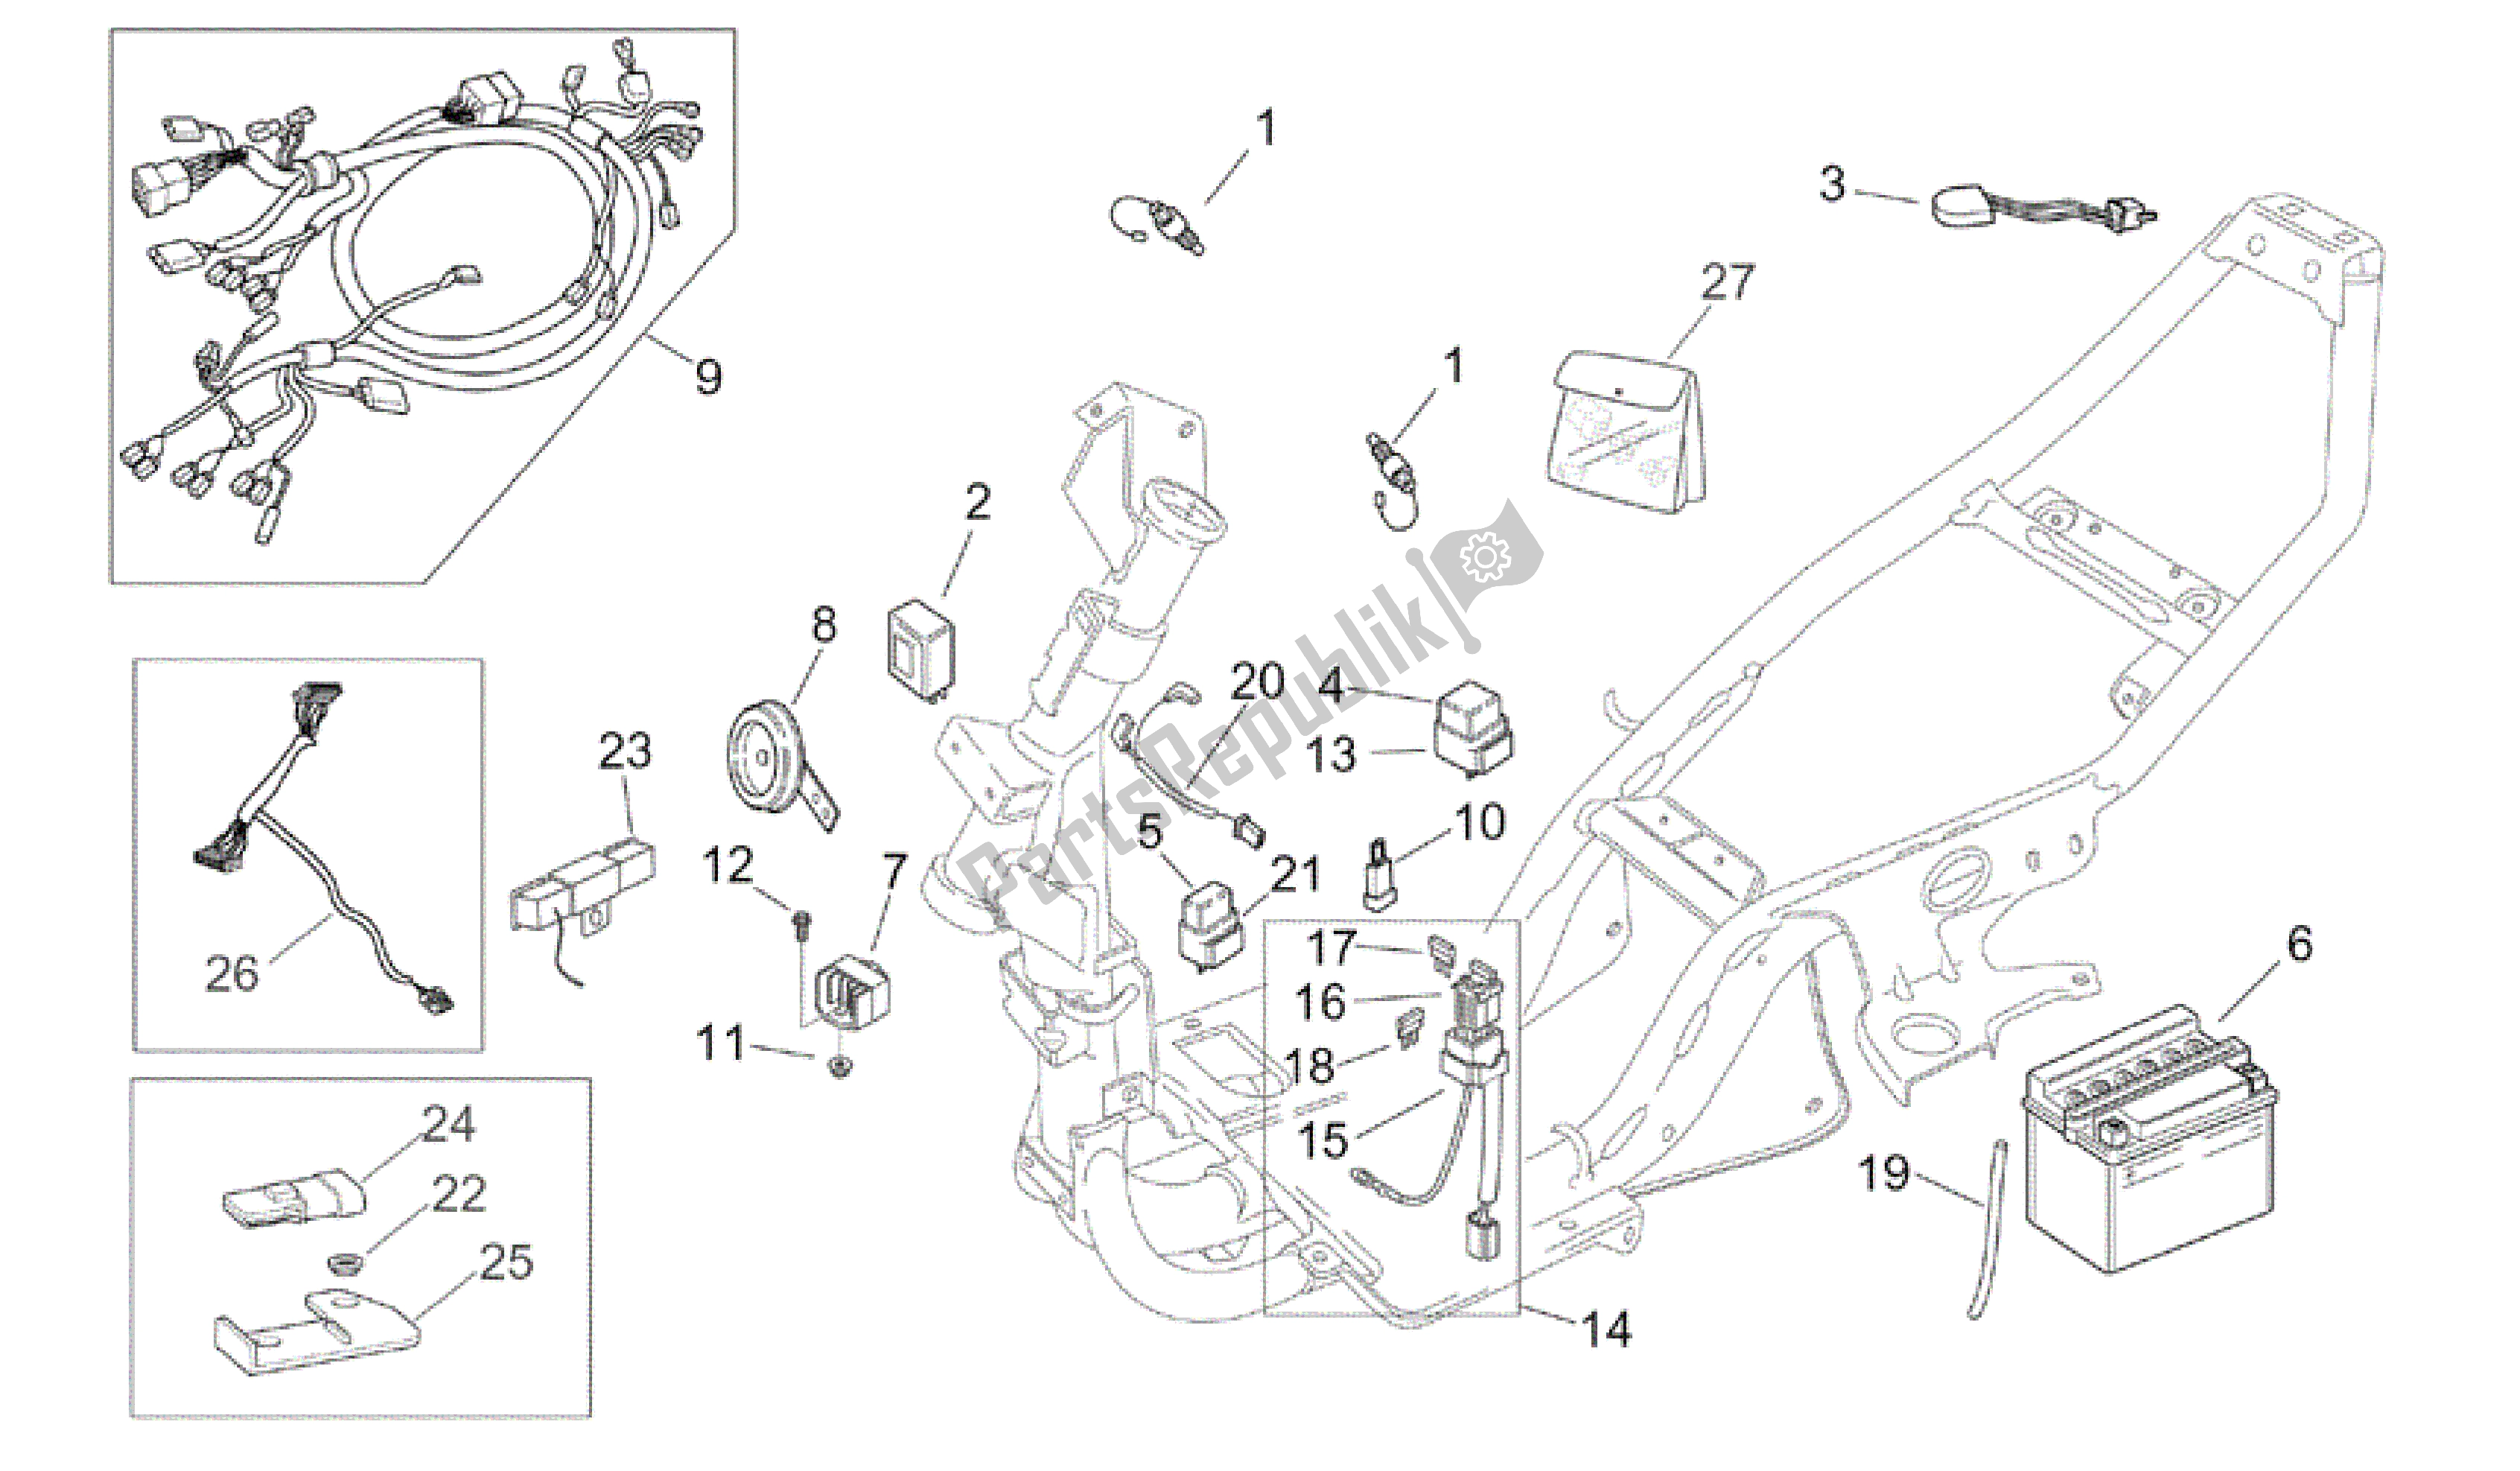 All parts for the Electrical System of the Aprilia SR 50 2000 - 2004